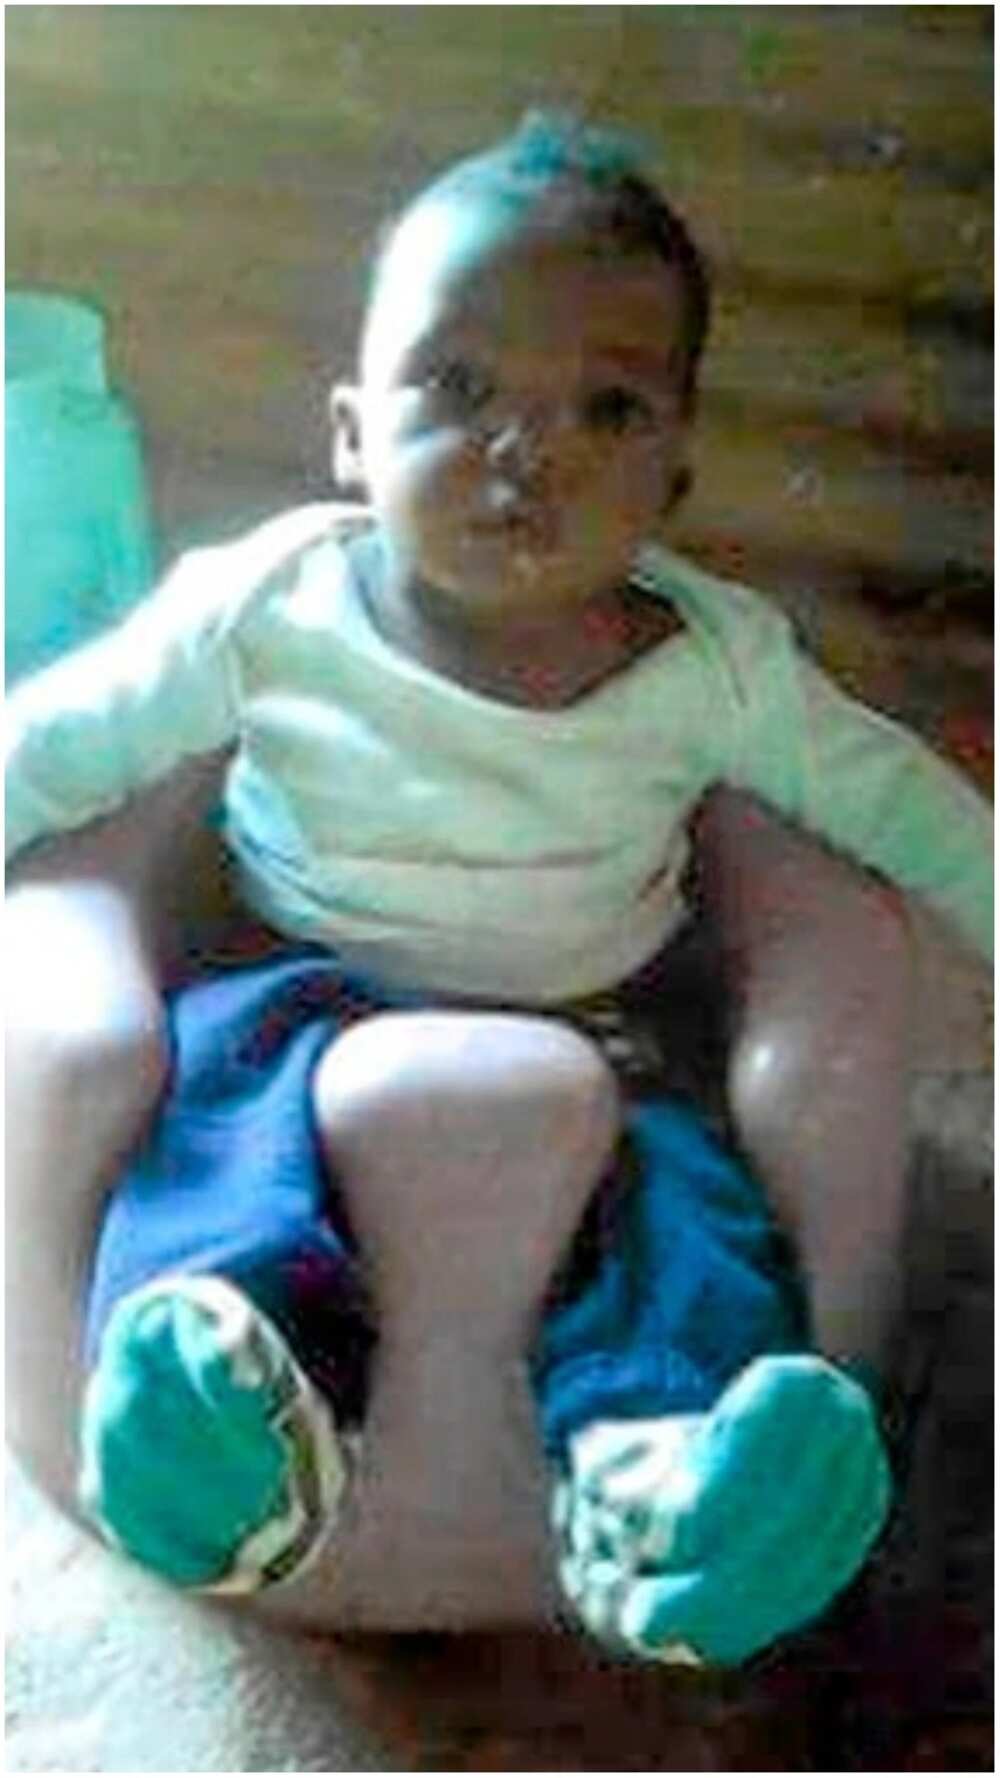 Husband brutally kills 6-month-old baby with pickaxe over wife’s alleged infidelity (photos)